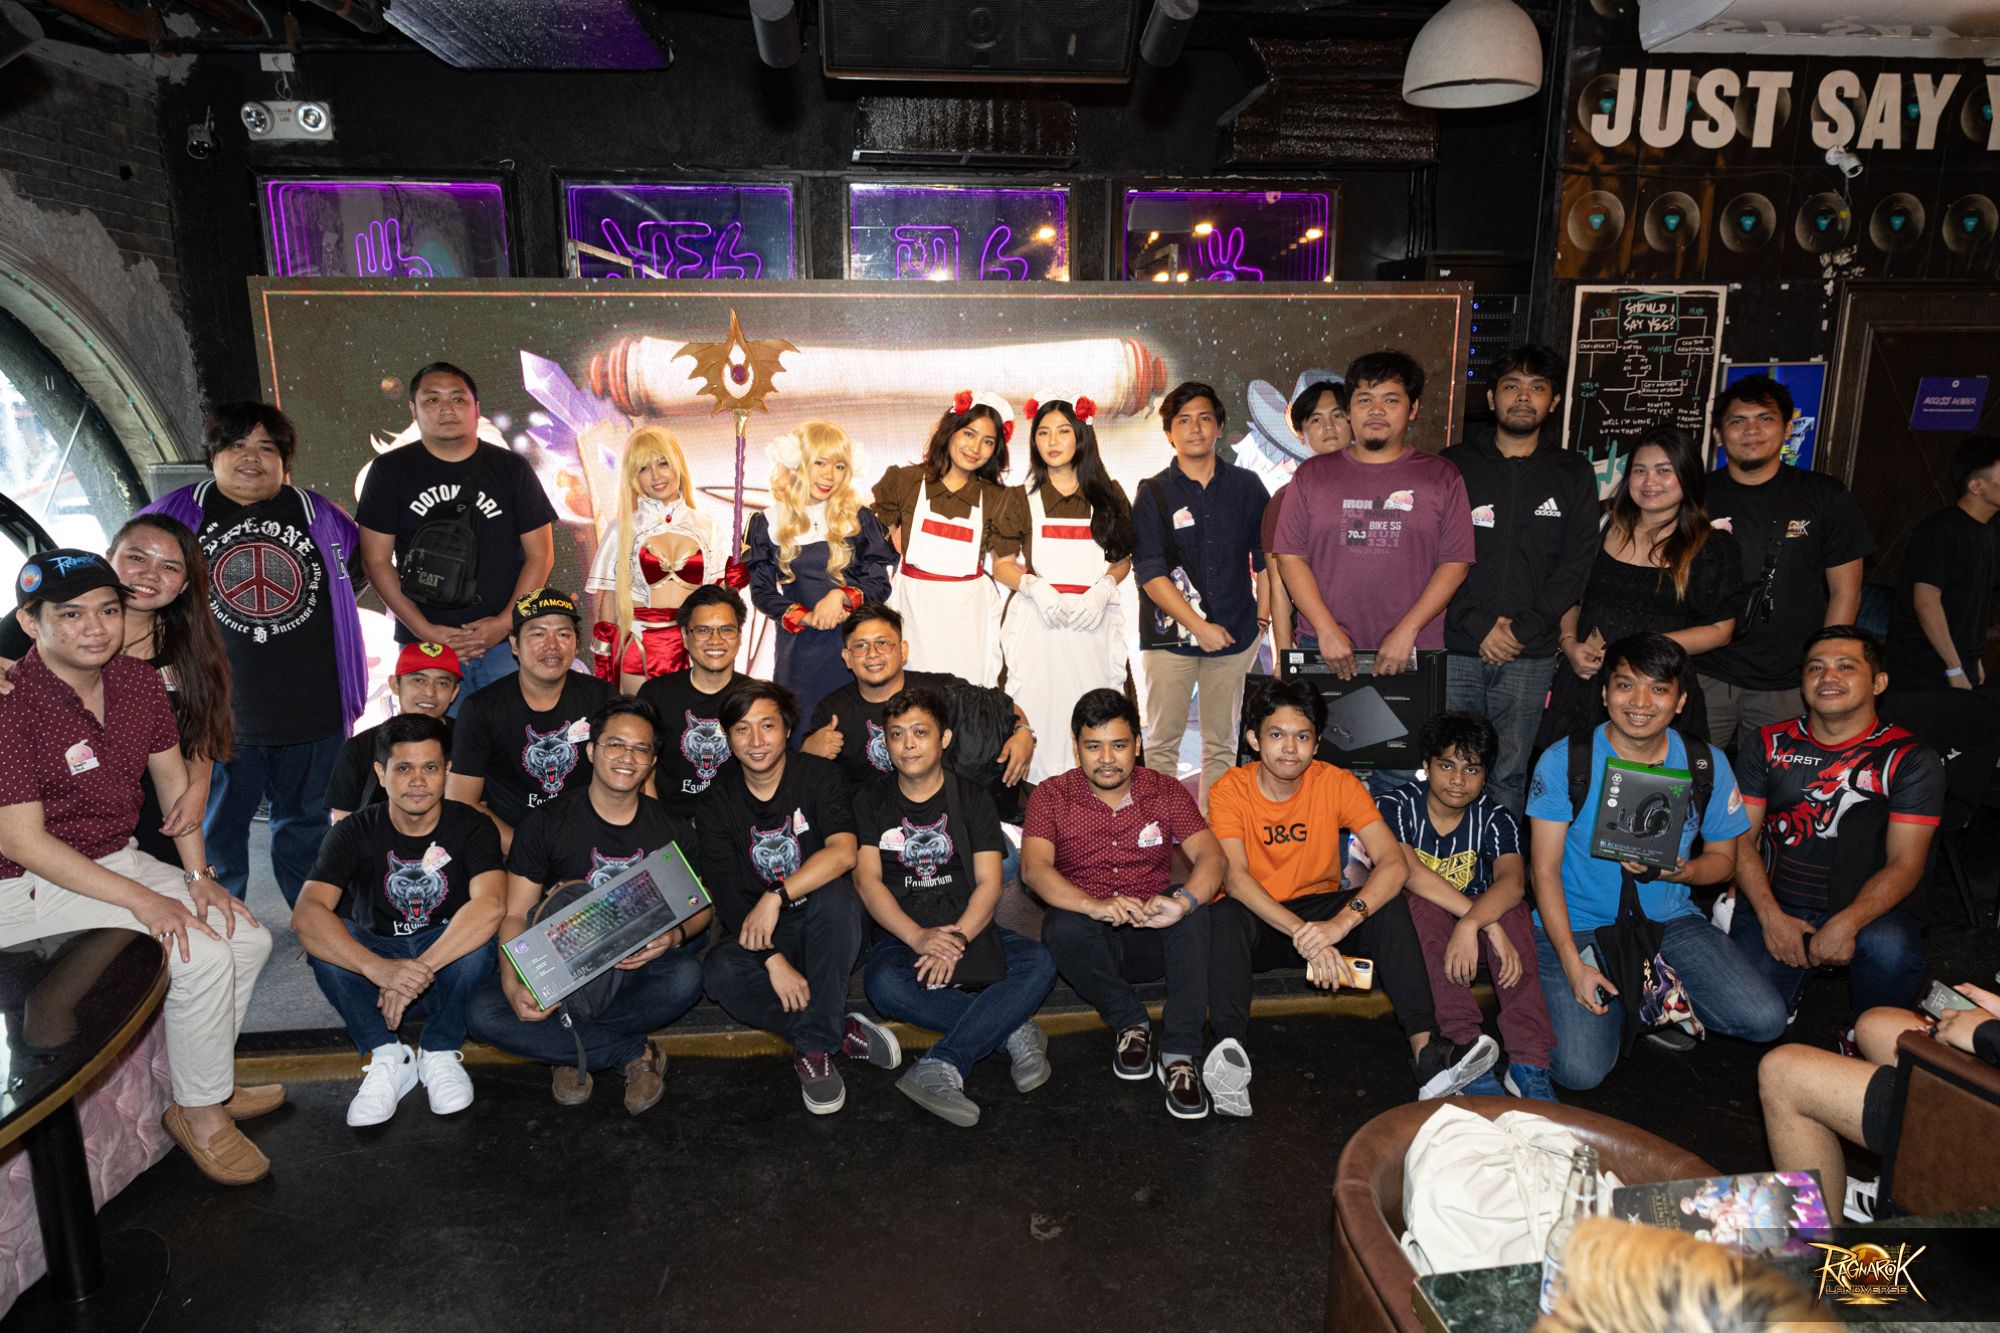 Group Photo of everyone/ overall gist of event.